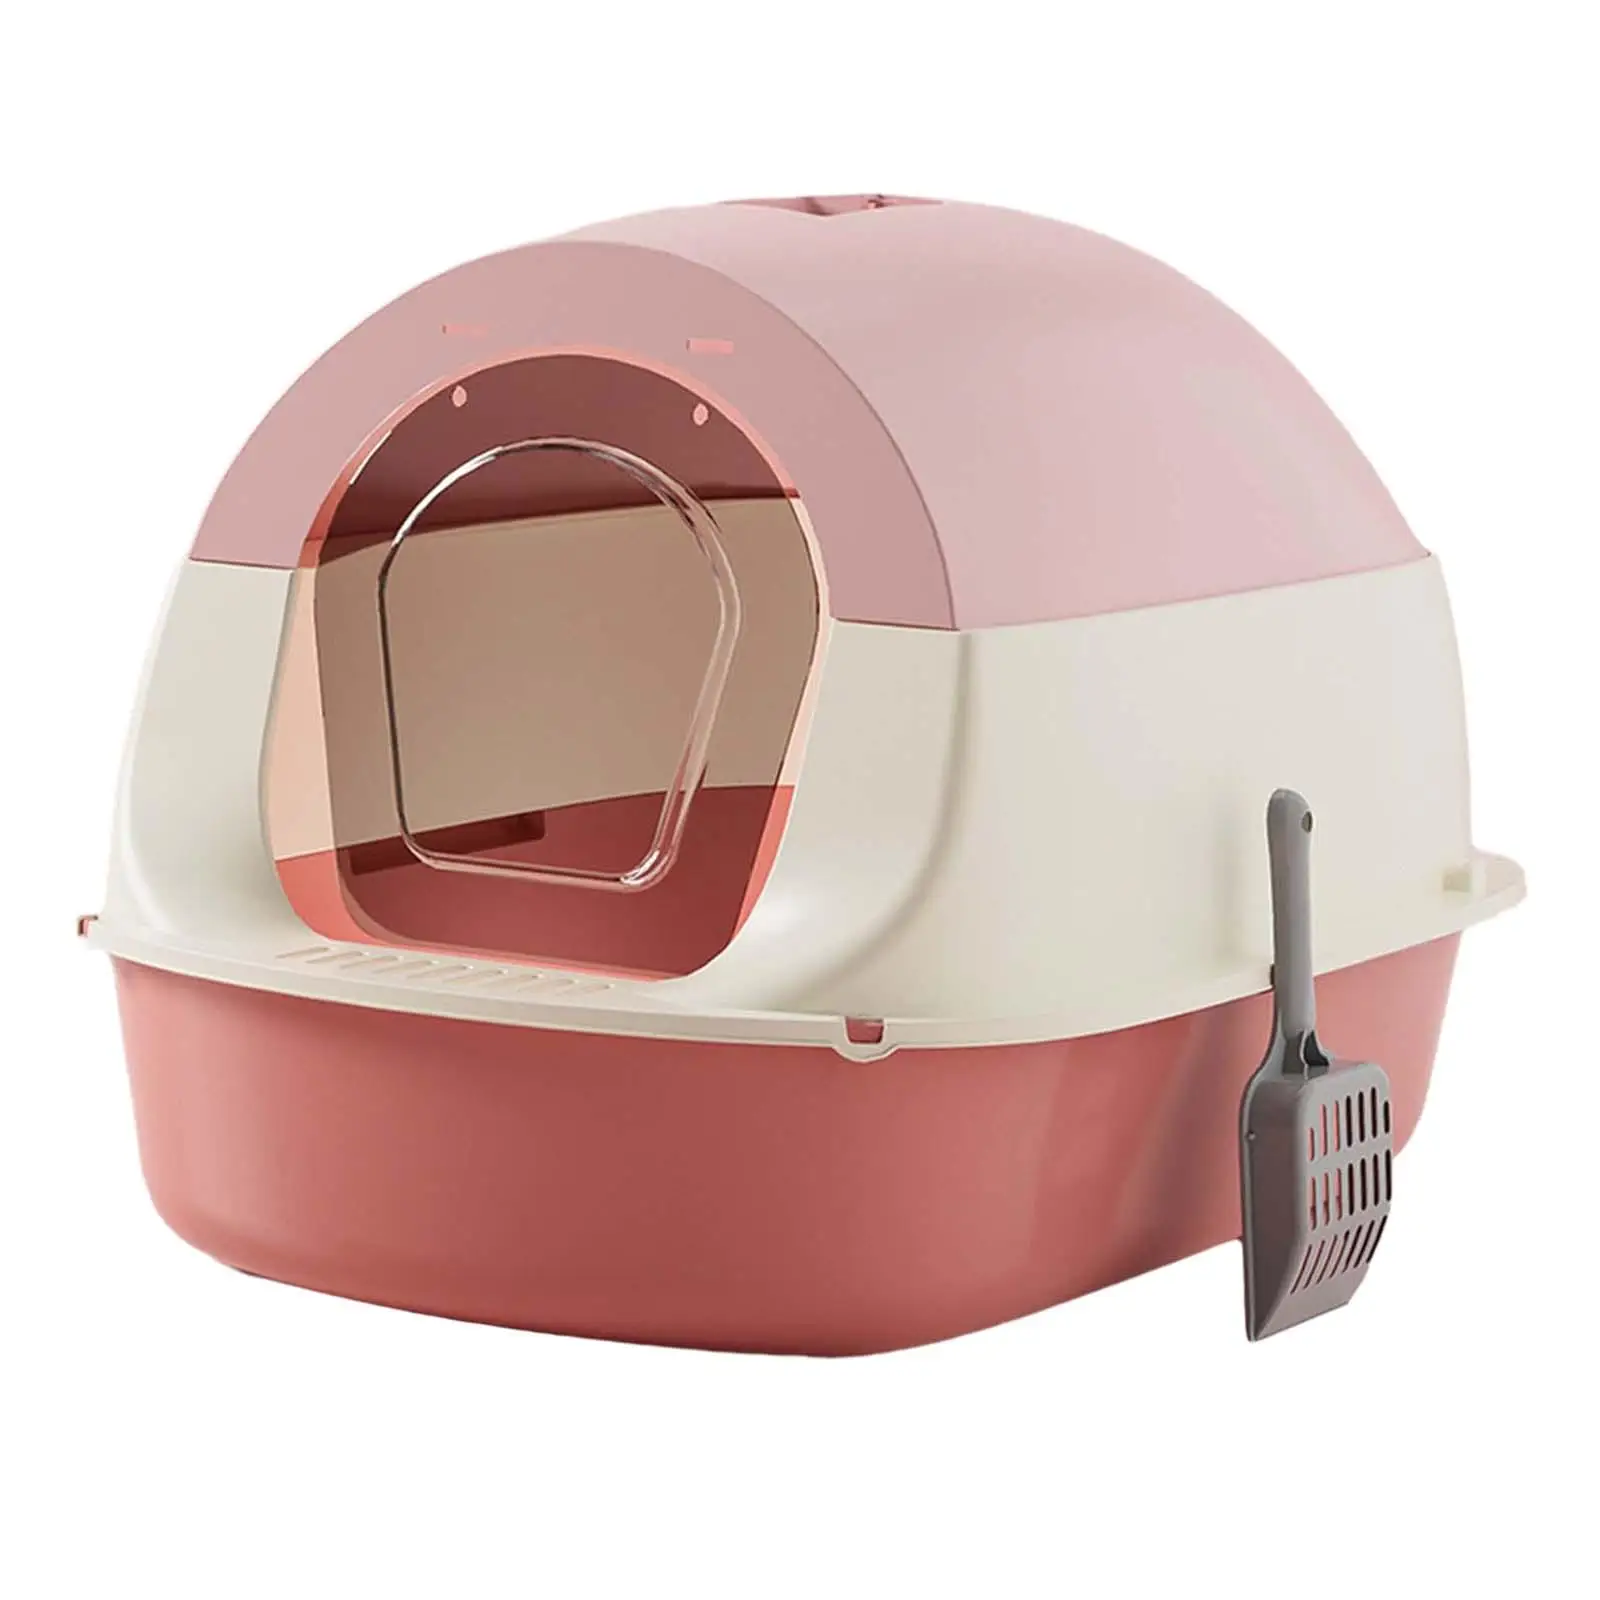 Hooded Cat Litter Box with Lid Detachable Enclosed Cat Toilet with Shovel